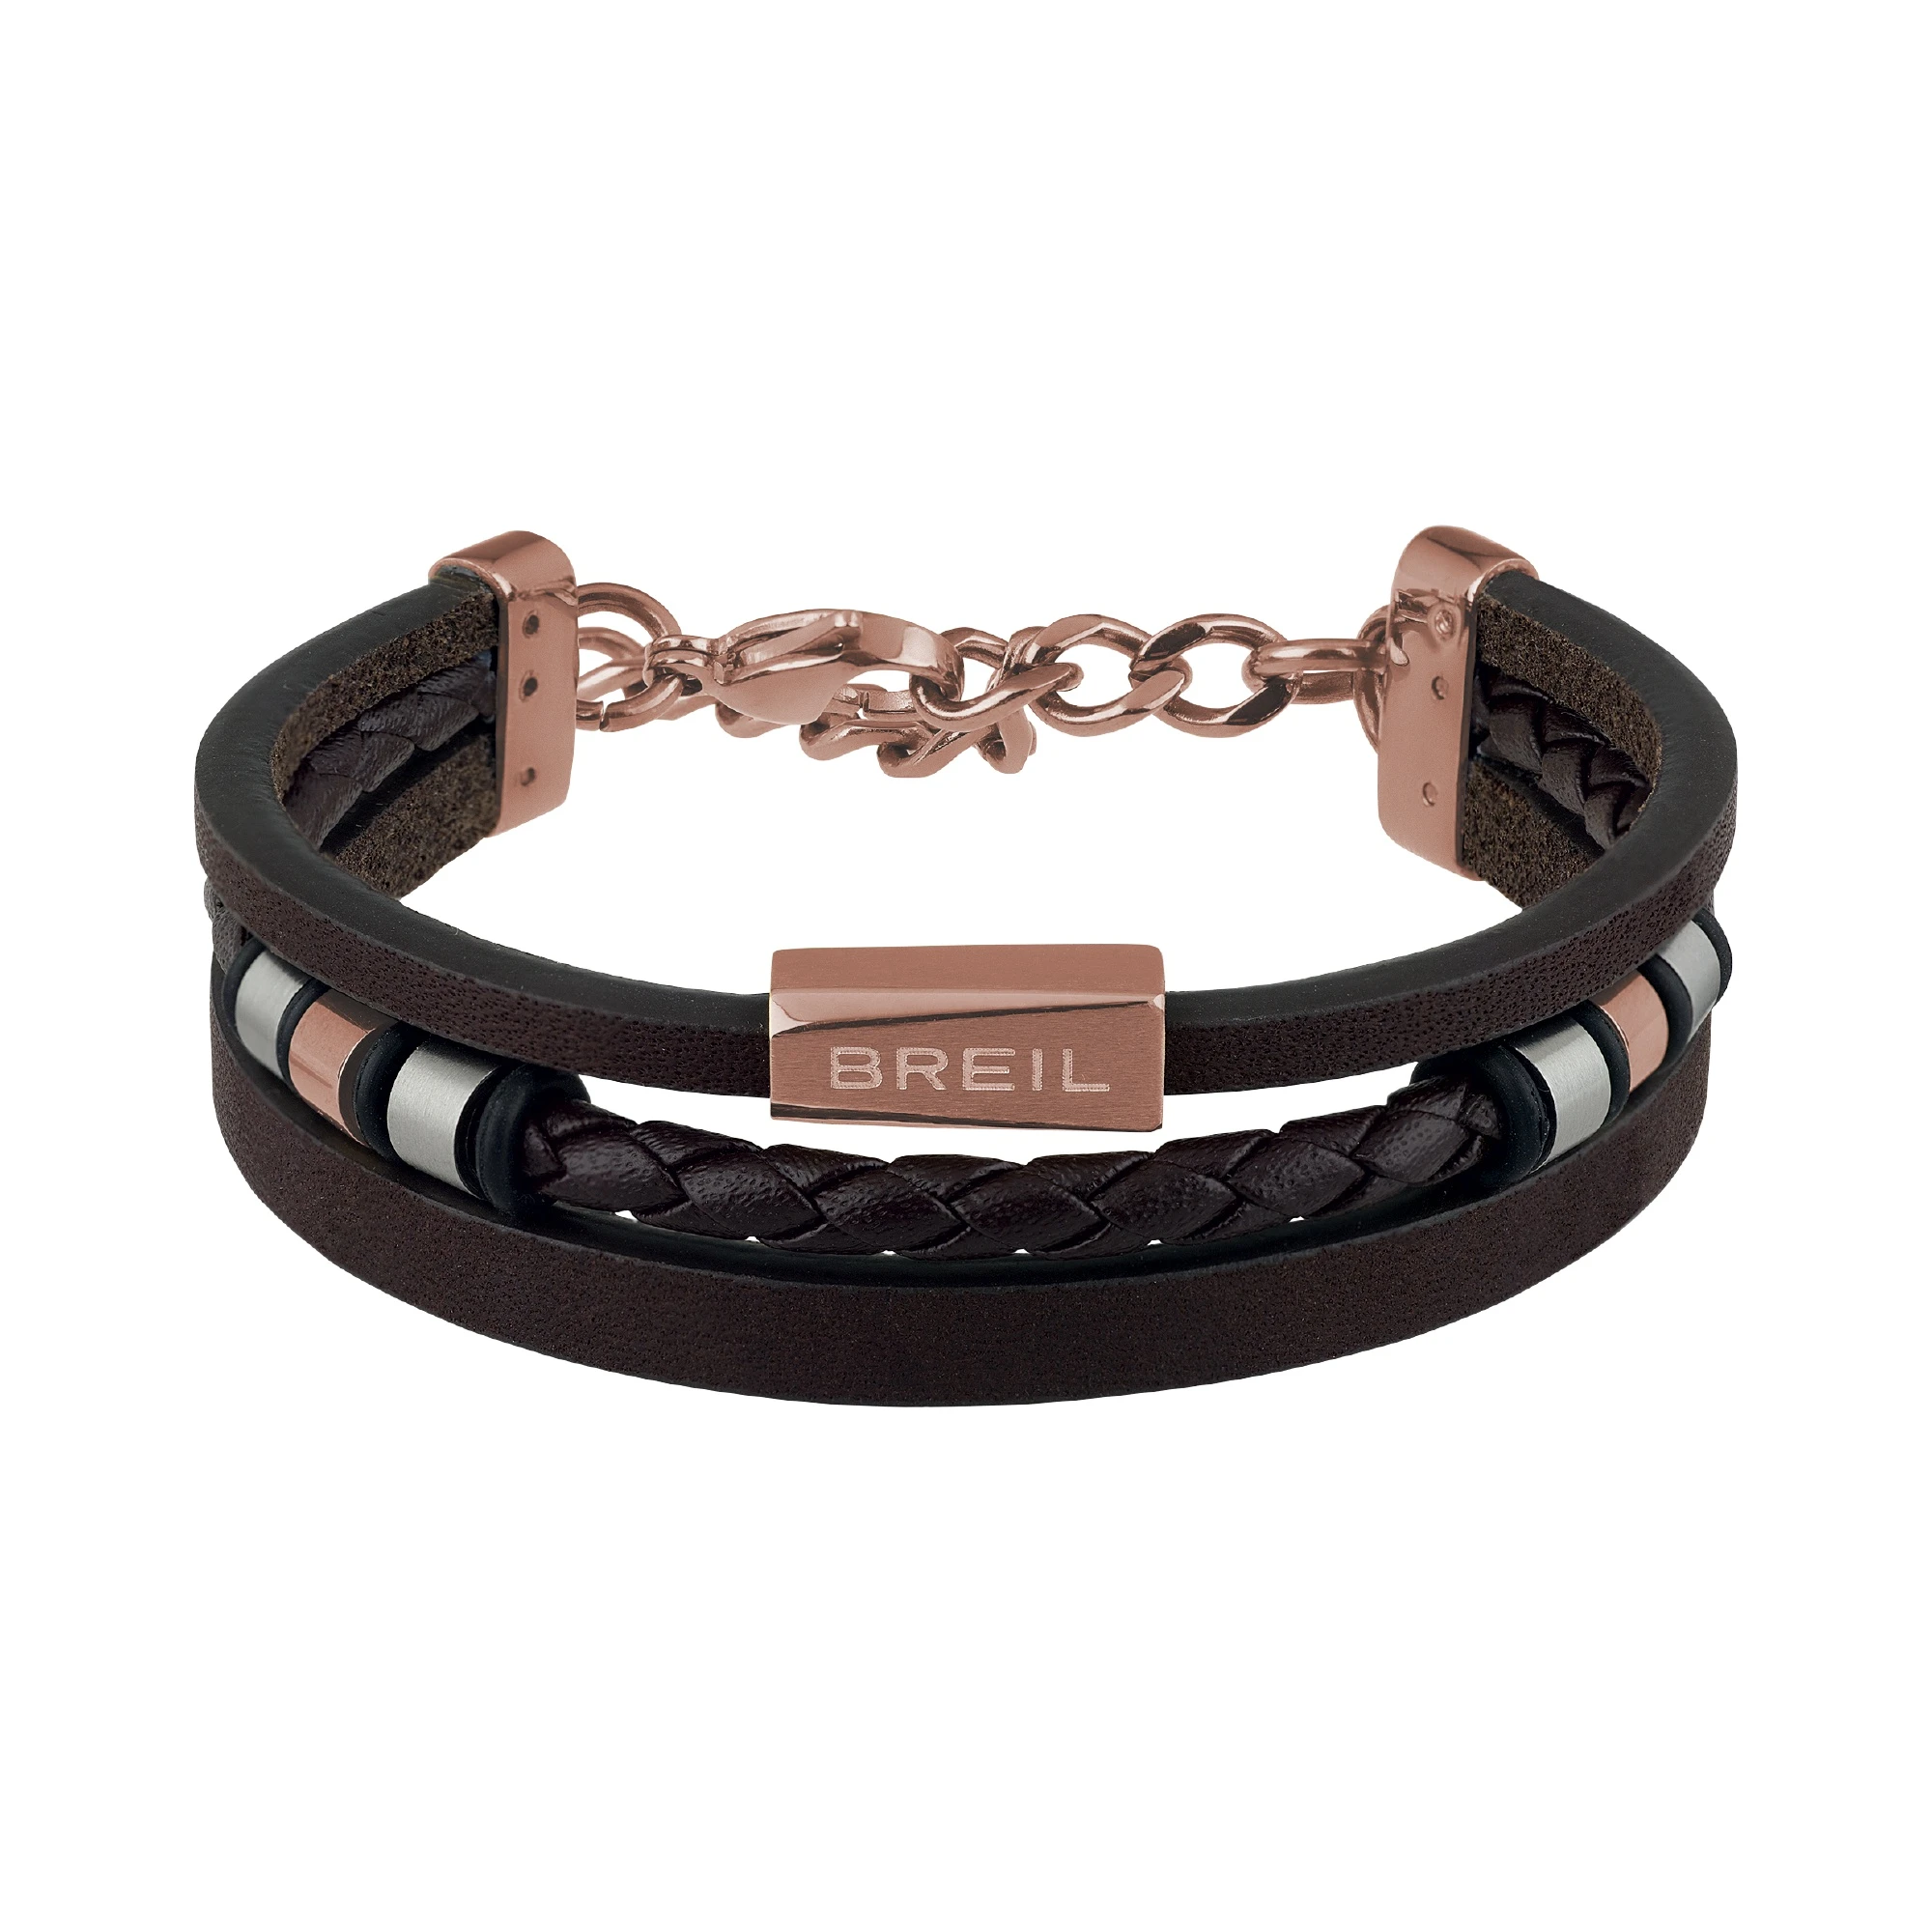 OUTER - BRACELET IN BROWN LEATHER AND STAINLESS STEEL DETAILS - 1 - TJ2670 | Breil